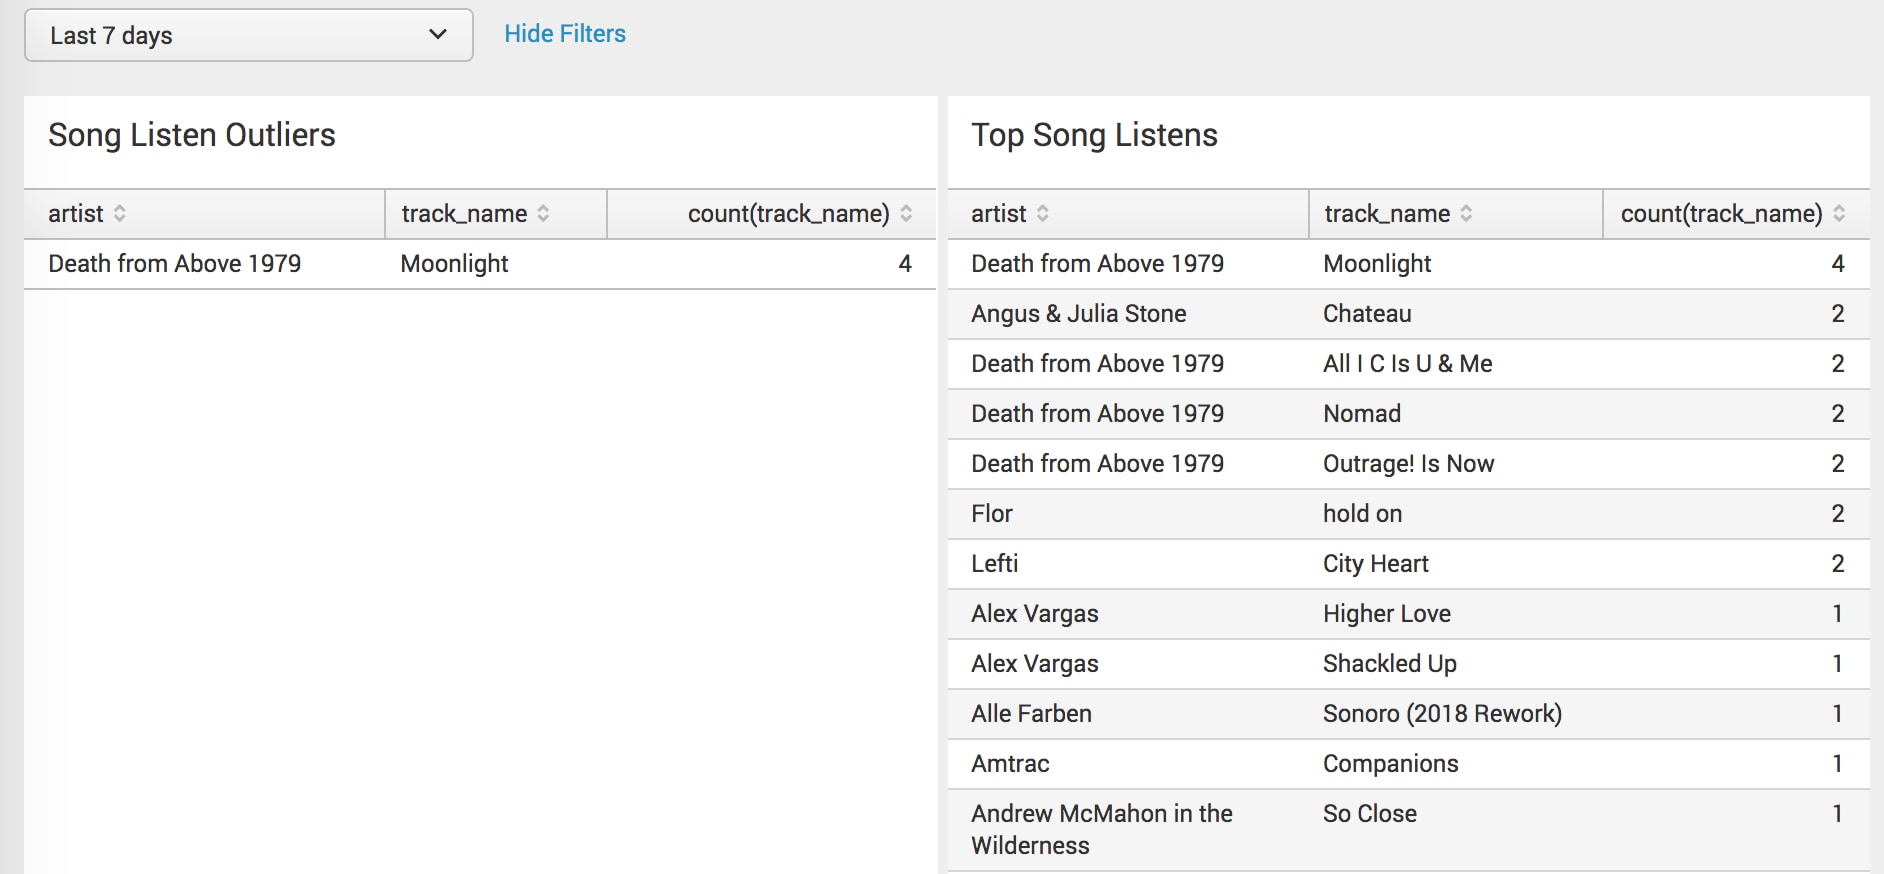 This screen capture shows the song outliers according to the machine learning toolkit search compared with the top listened songs in the same time range. The outlier song is Moonlight by Death From Above 1979, which is the top-listened-to song for the same time range.